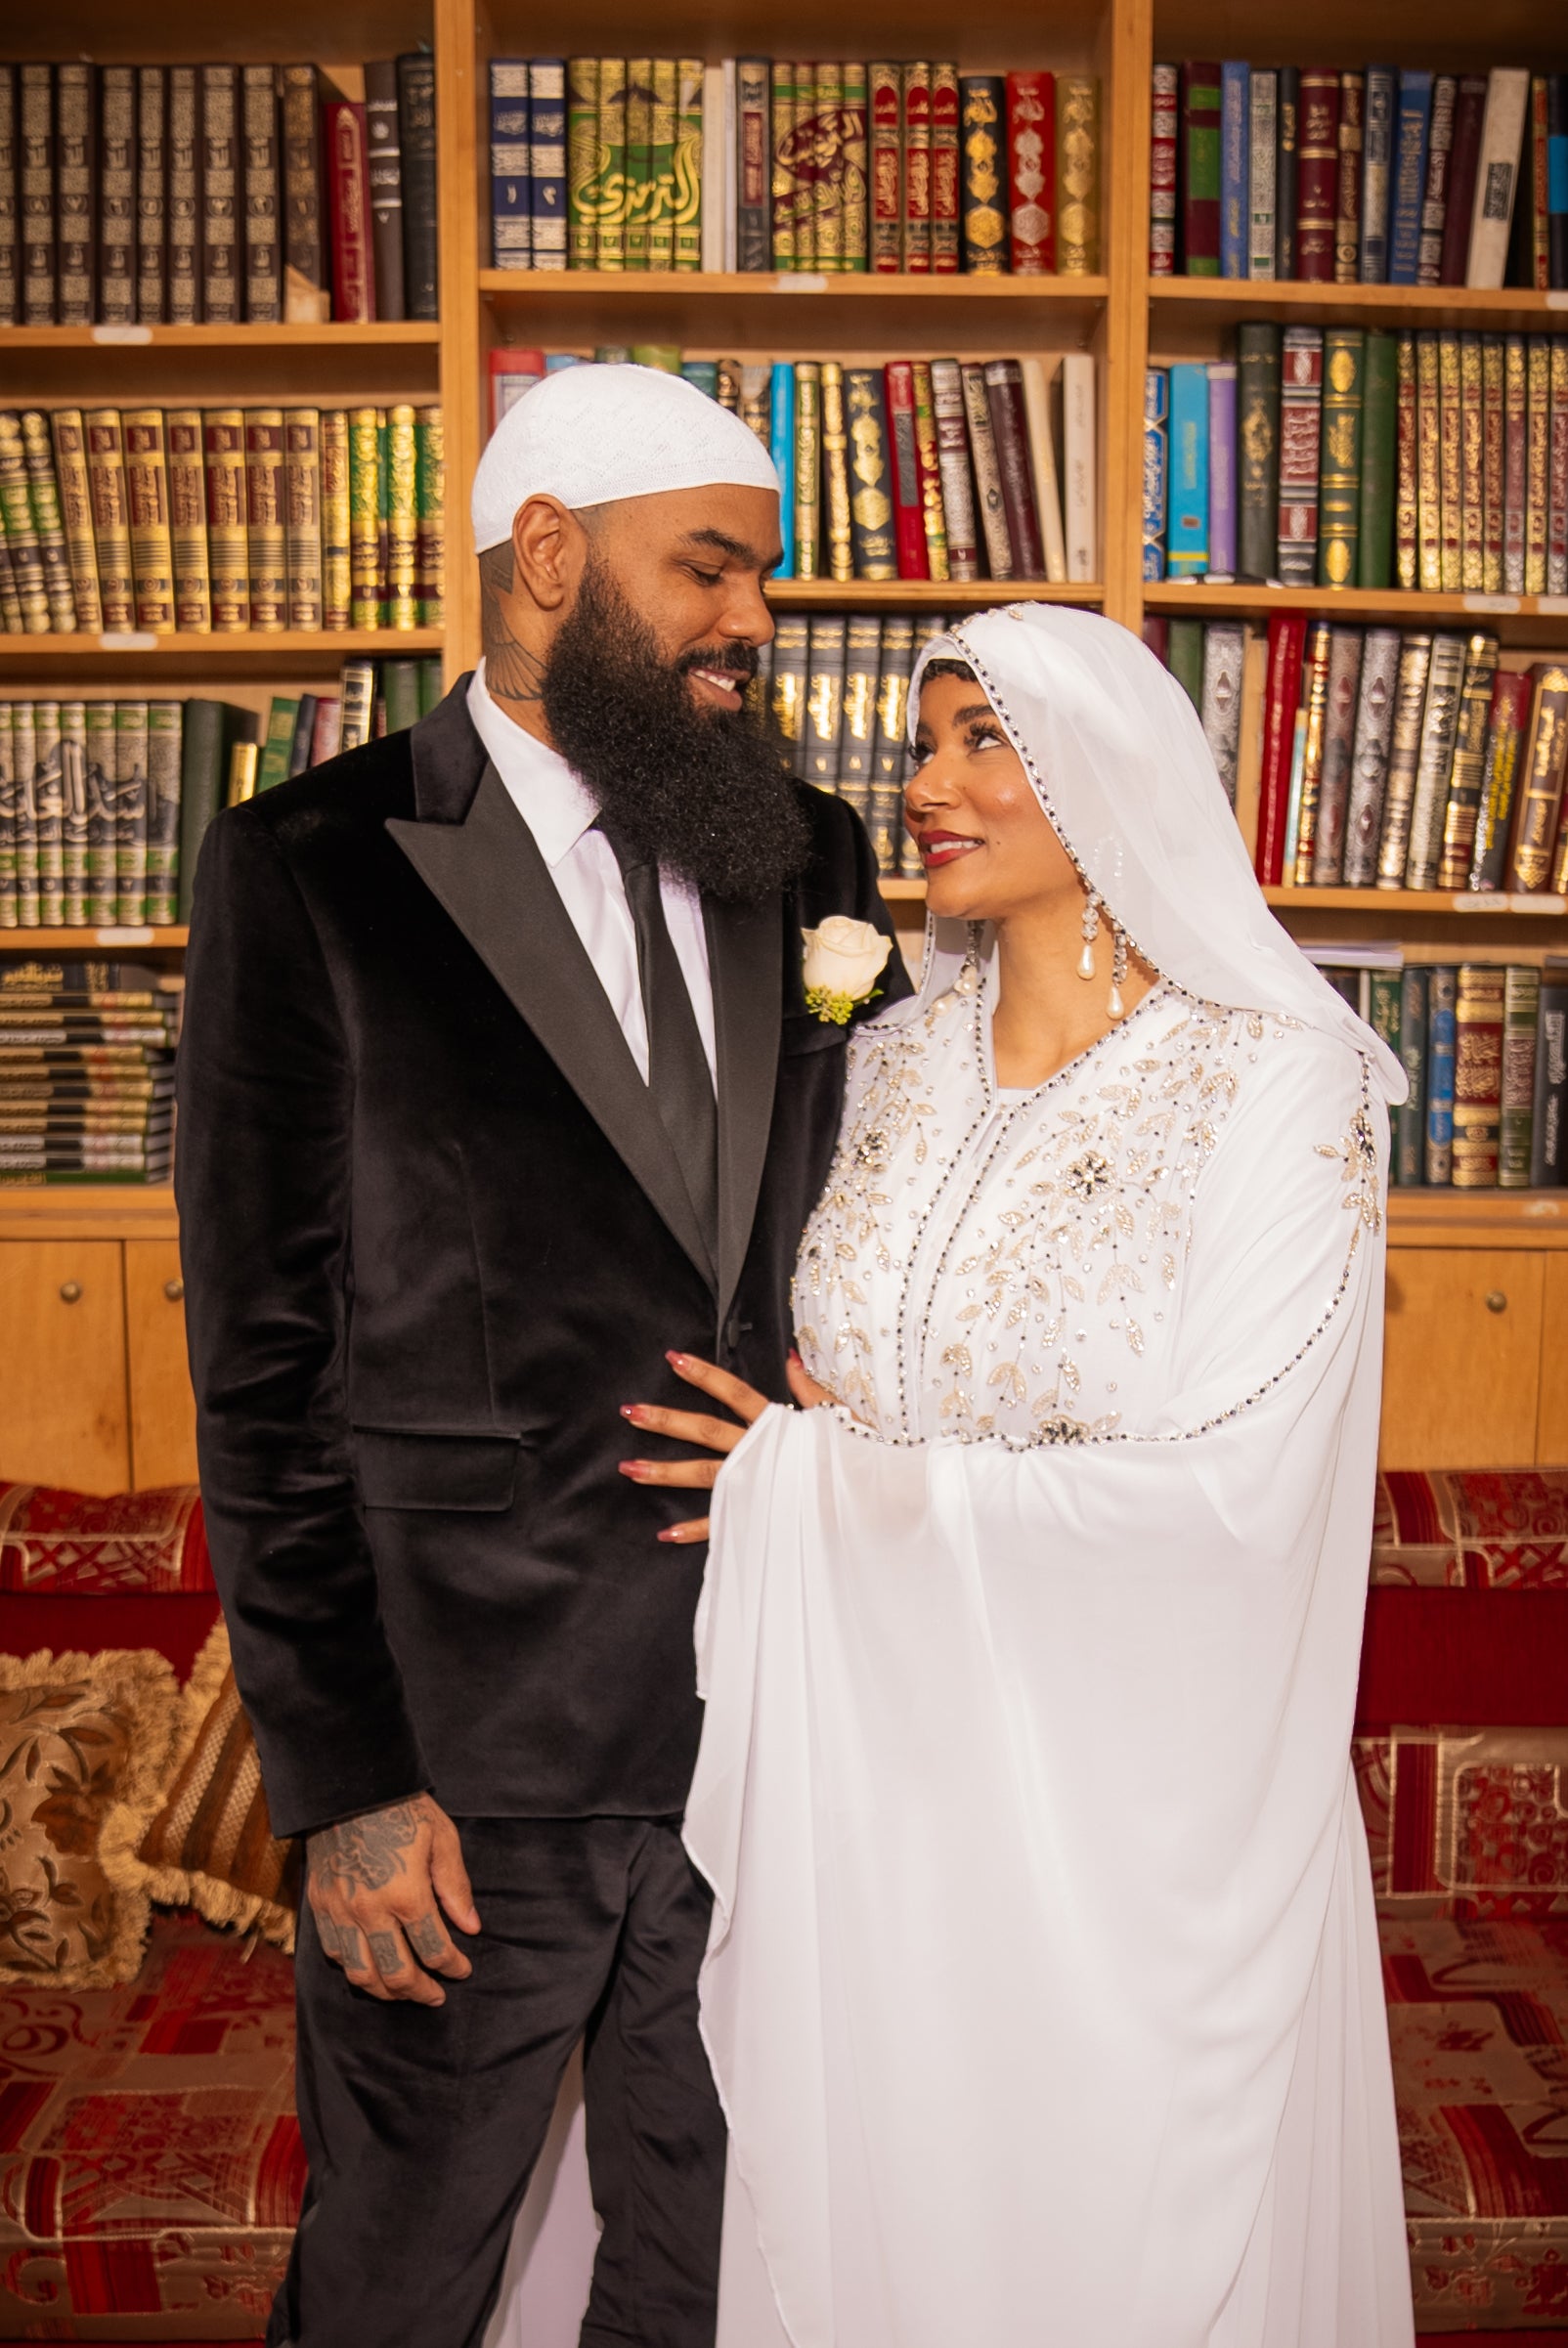 Bridal Bliss: With Ceremonies At City Hall And A Mosque, Aiesha And Rapper Stalley's Wedding Was An 'All-Day Celebration'